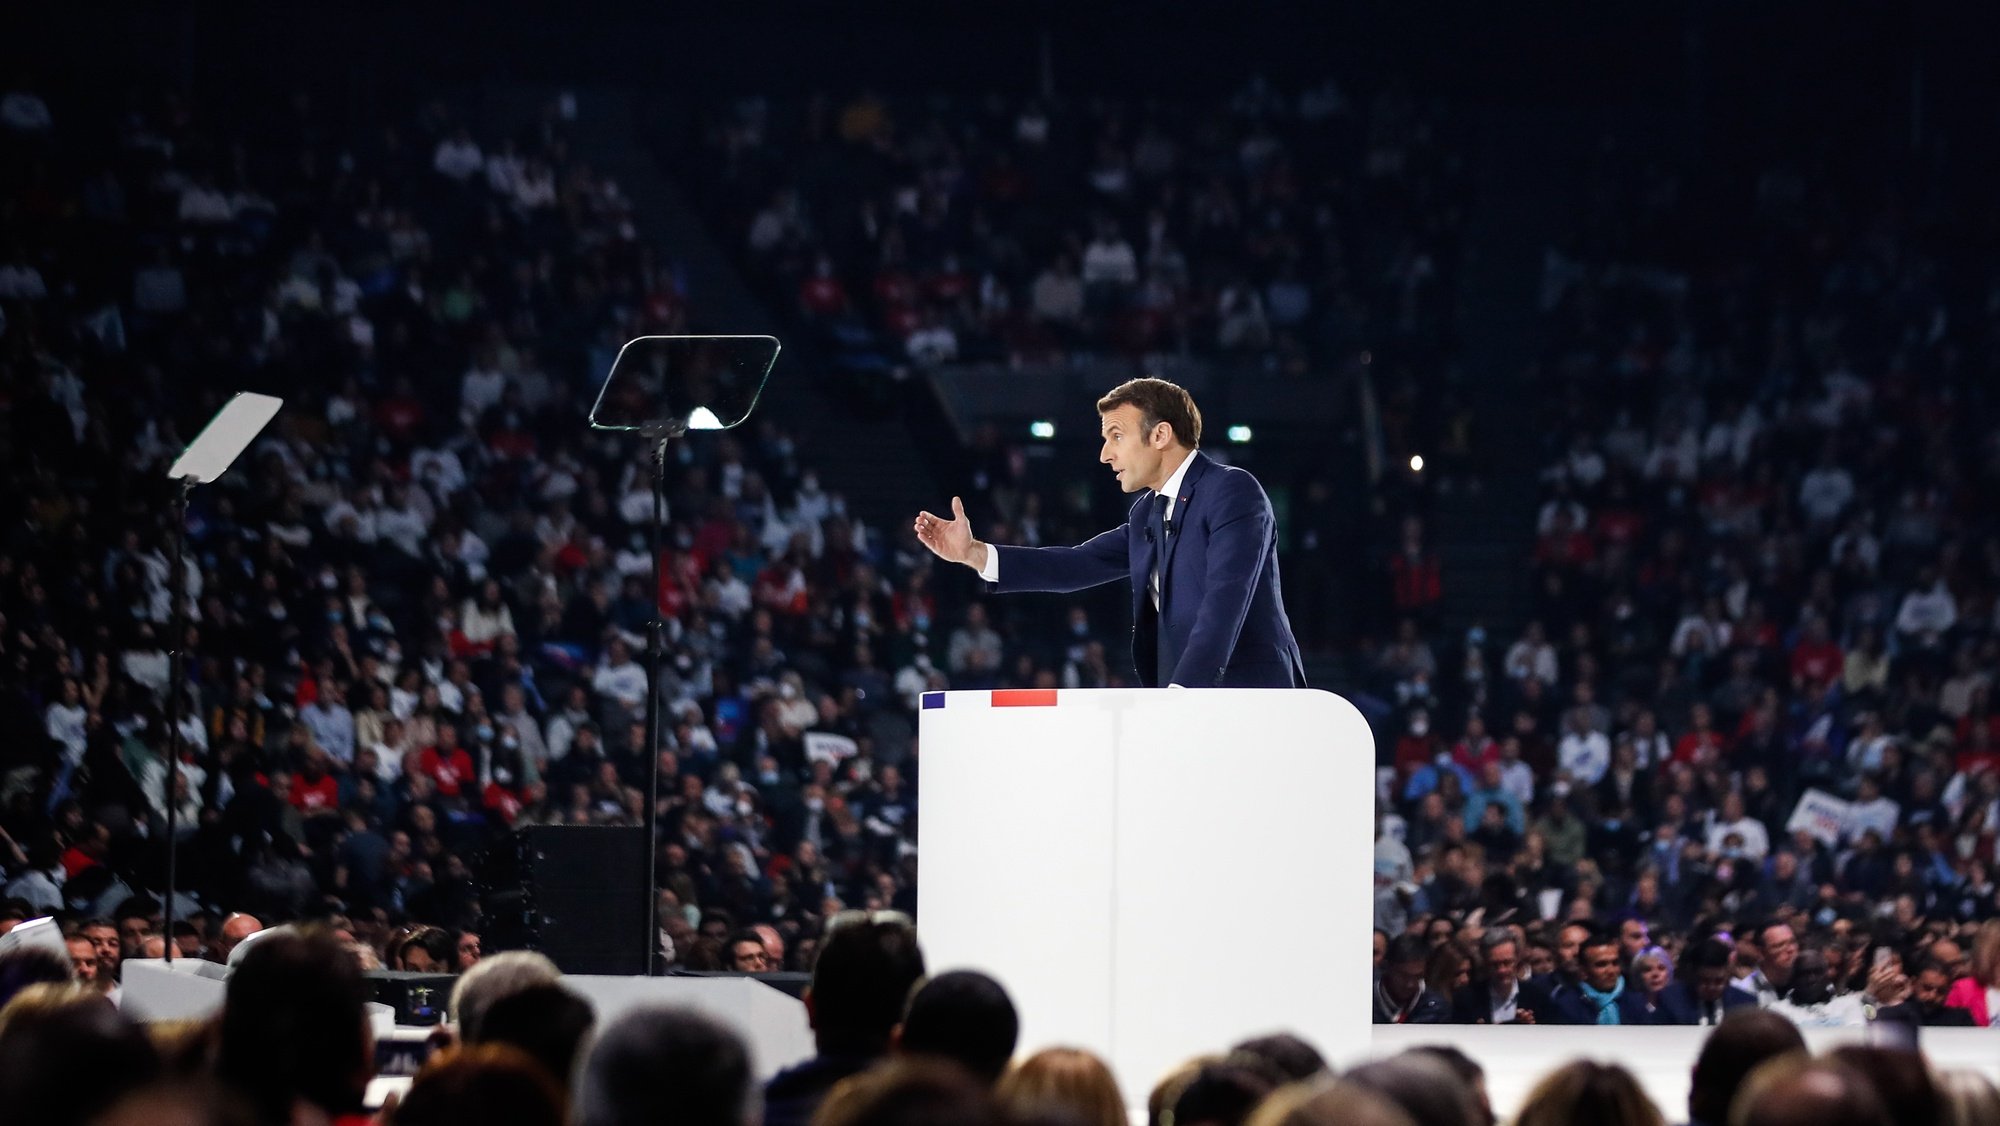 epaselect epa09866169 French President and liberal party La Republique en Marche (LREM) candidate for re-election Emmanuel Macron (C) deliver a speech during his first campaign meeting at the Paris La Defense Arena in Nanterre, near Paris, France, 02 April 2022. The first round of the French presidential election will take place on 10 April 2022 and the second round on 24 April 2022.  EPA/Mohammed Badra